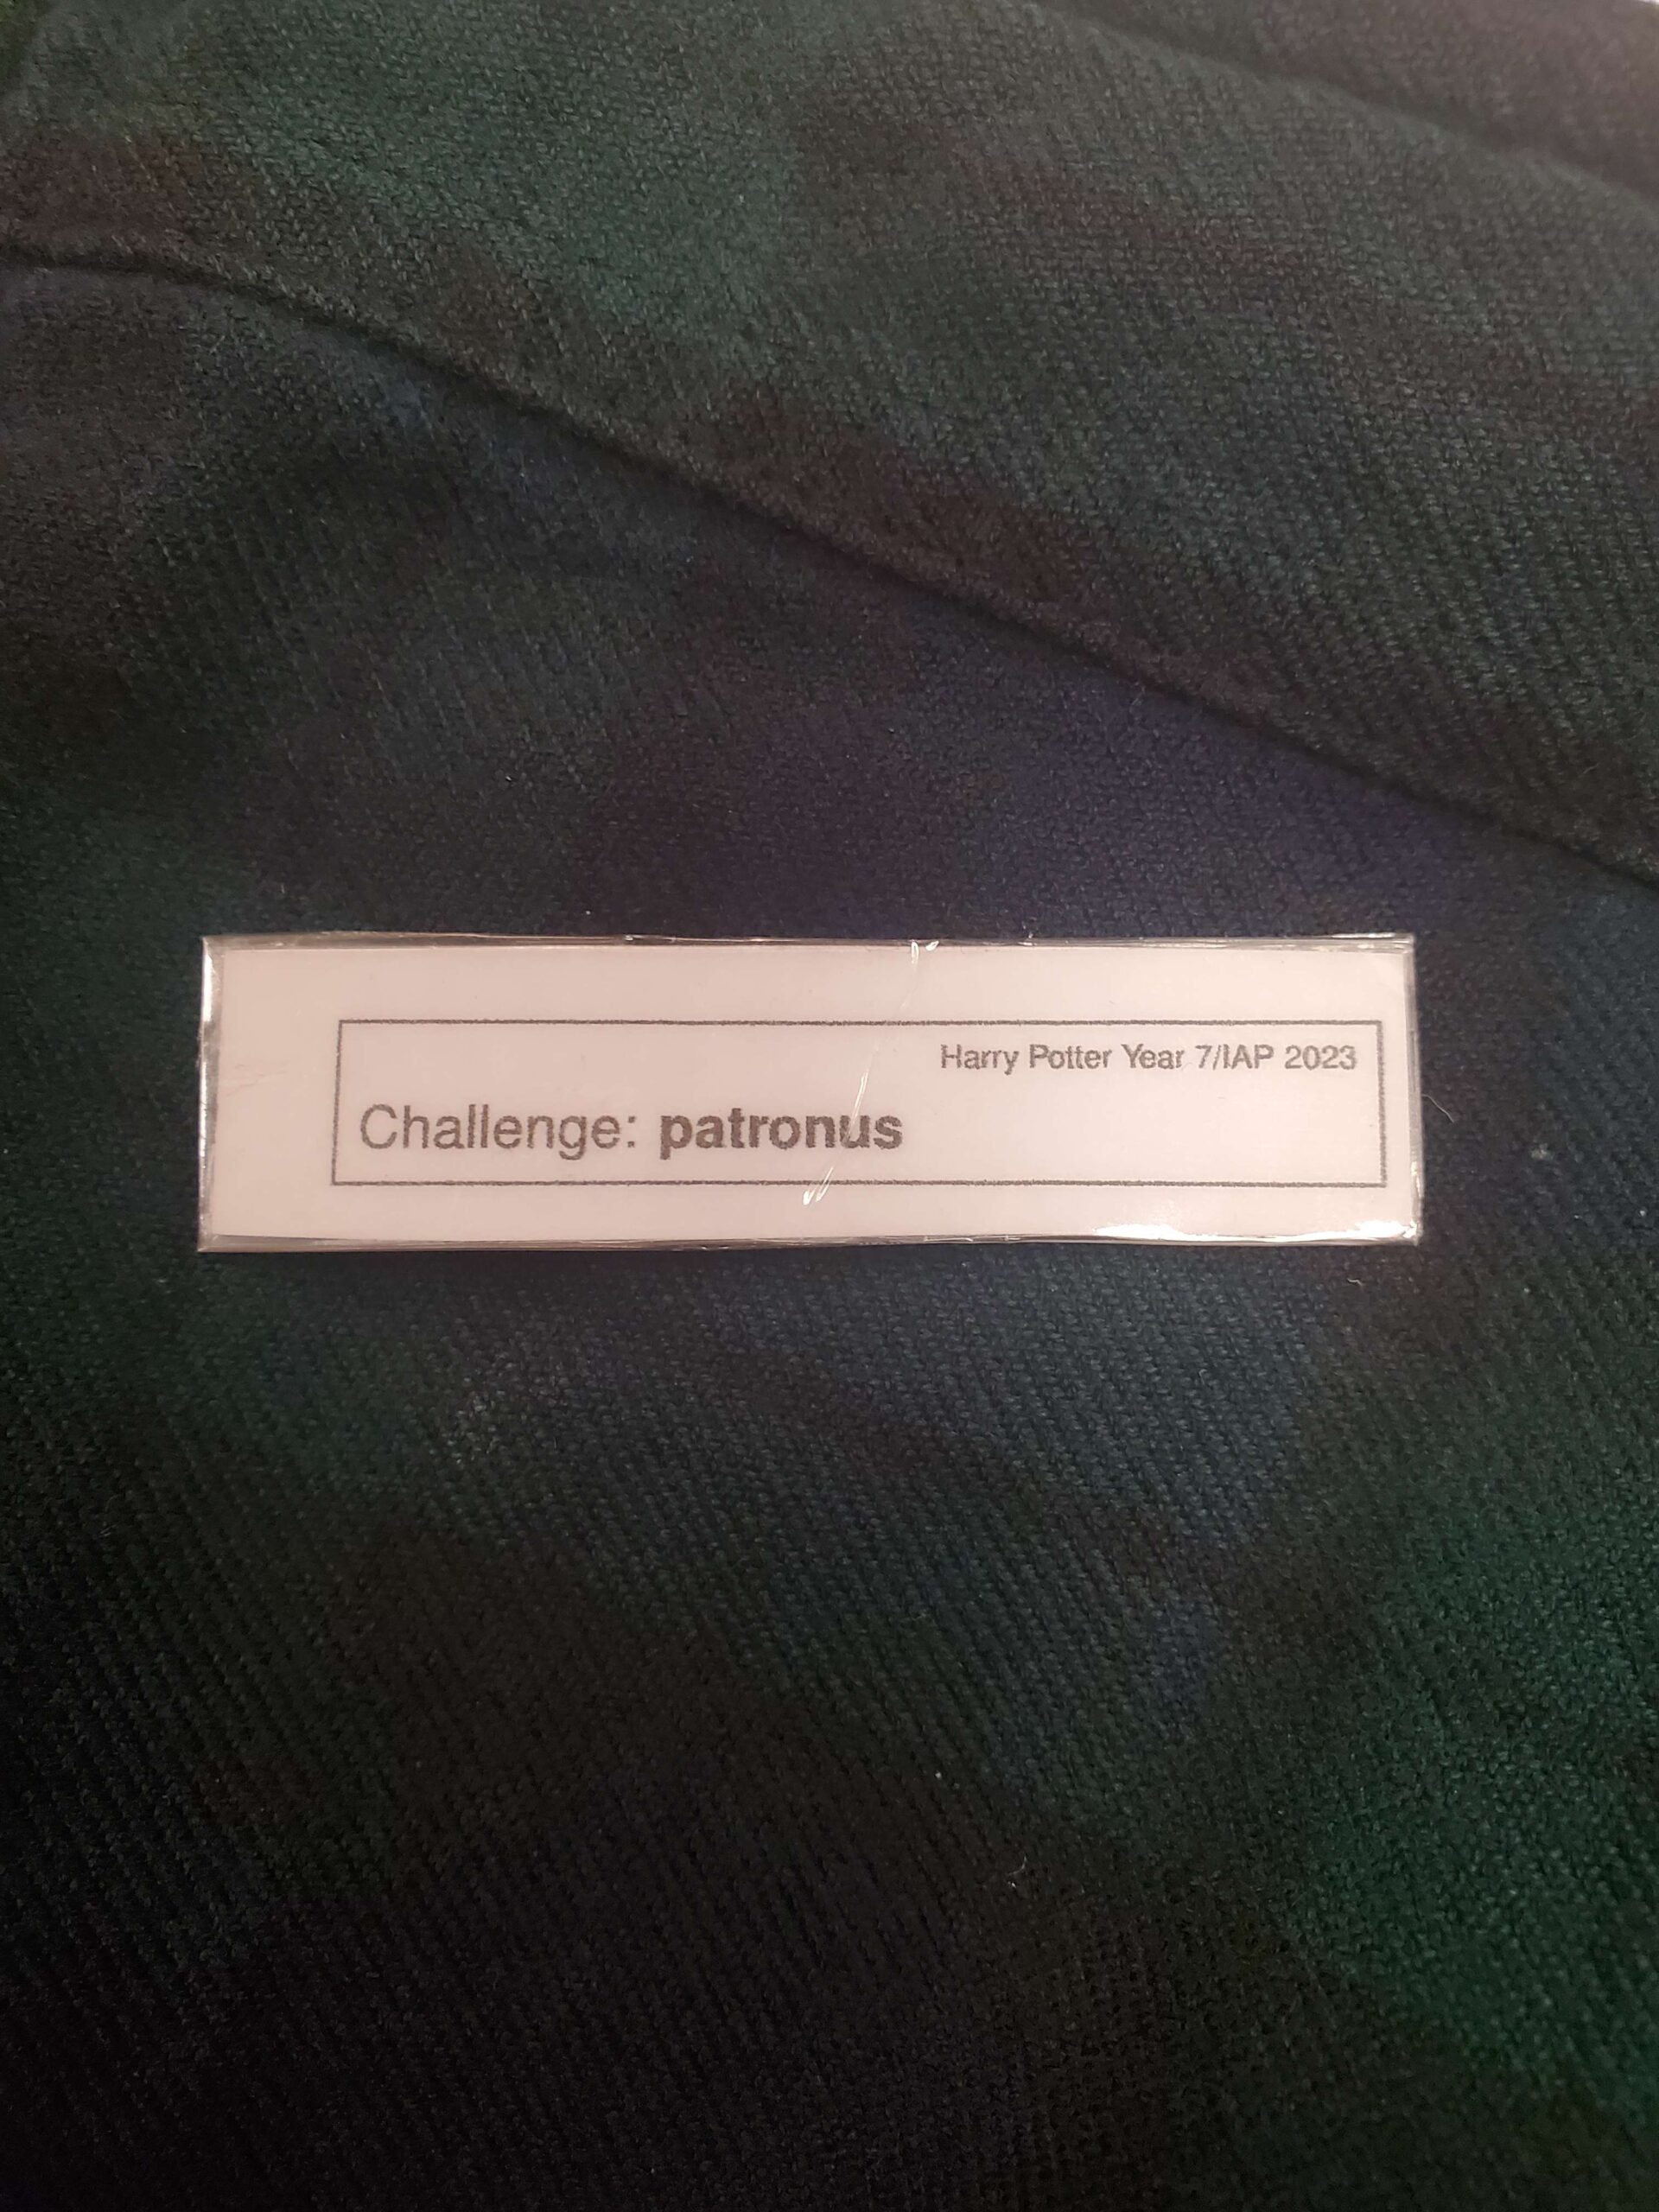 a small strip of paper saying "Challenge: patronus"